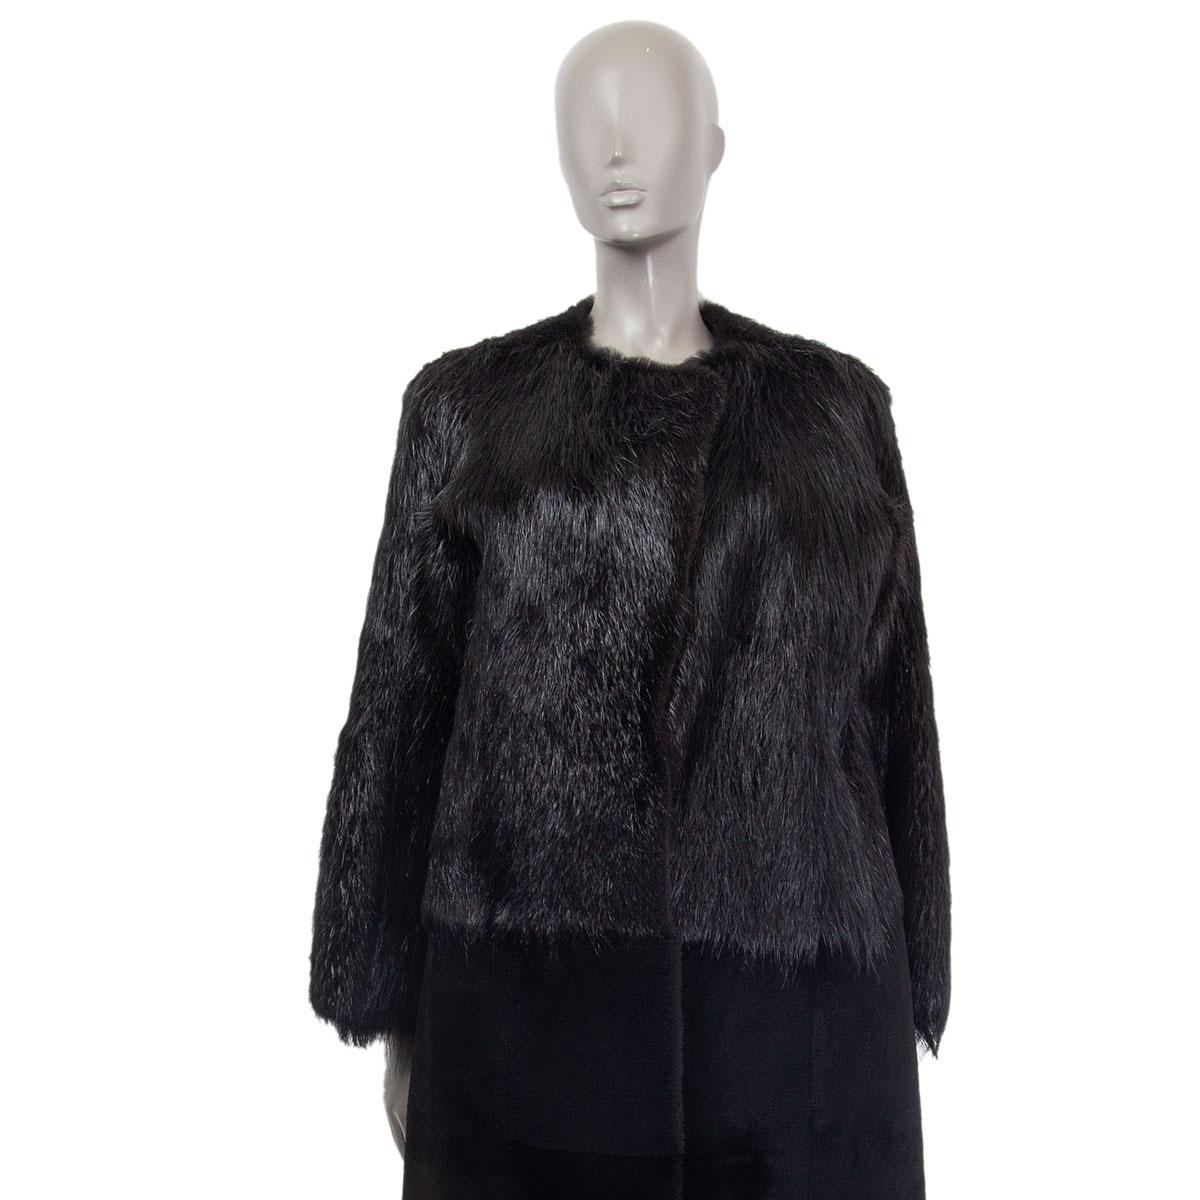 Jil Sander portico leather-lined fur coat in black dyed beaver fur with a collarless neckline and side slit pockets. Closes on the front with a hook and snap buttons. Lined in leather. Has been worn and is in excellent condition. 

Tag Size Missing